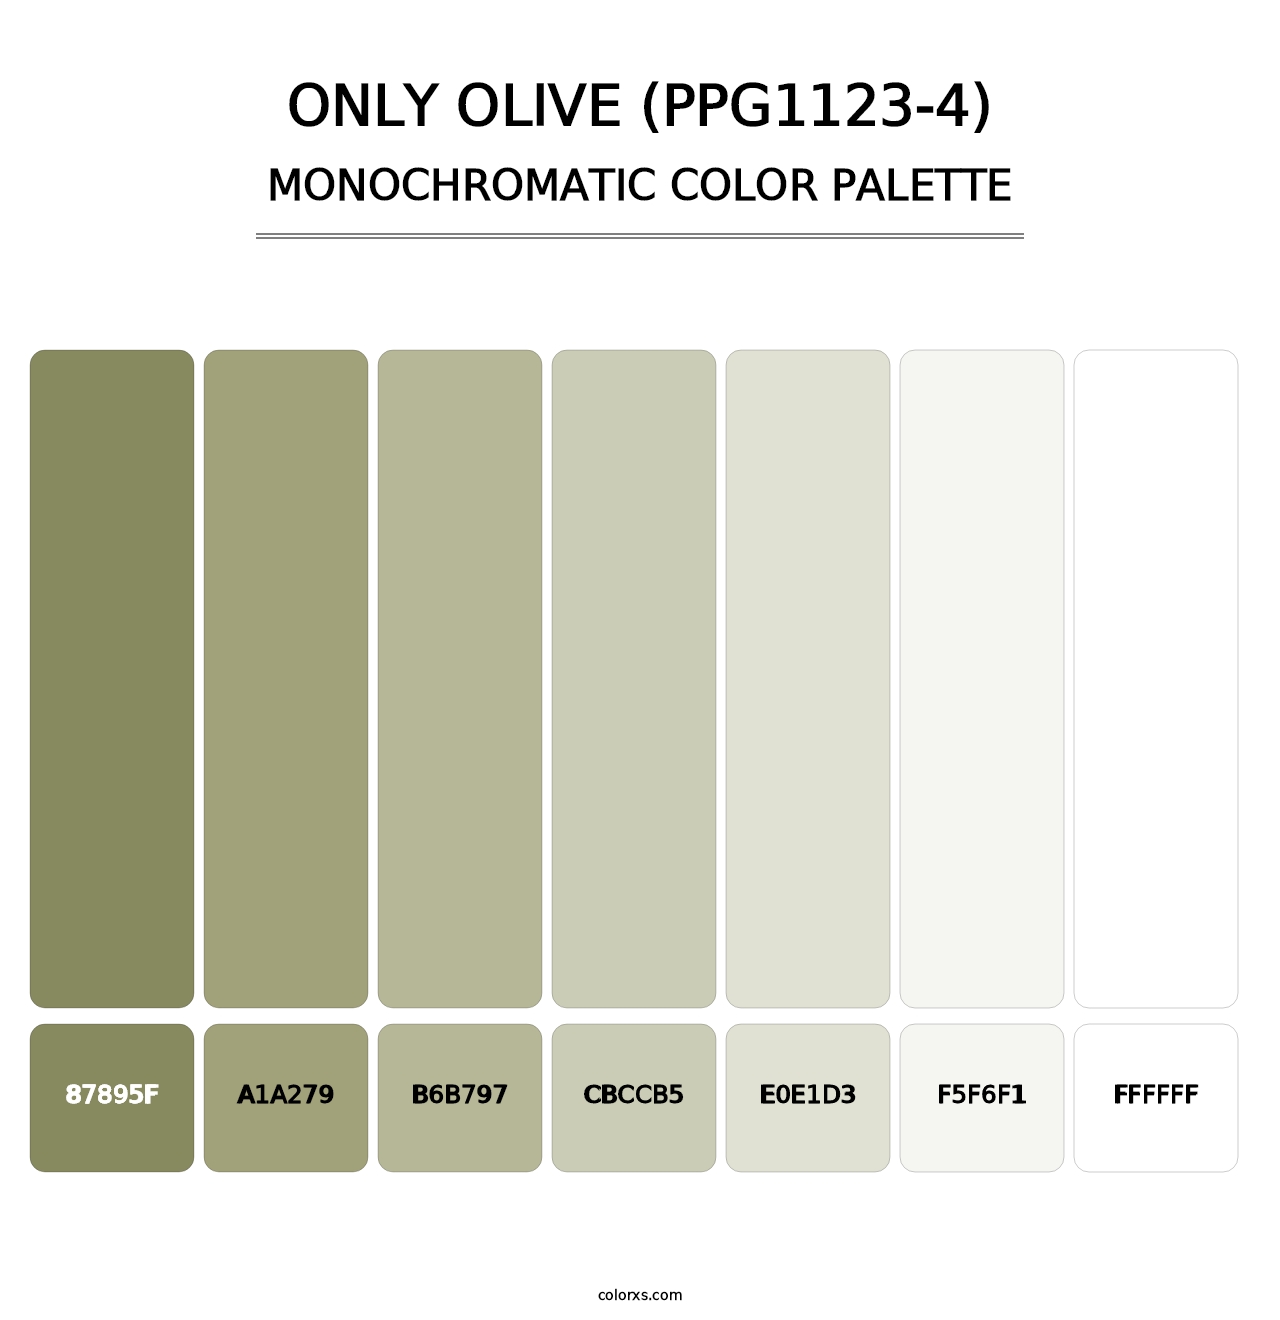 Only Olive (PPG1123-4) - Monochromatic Color Palette